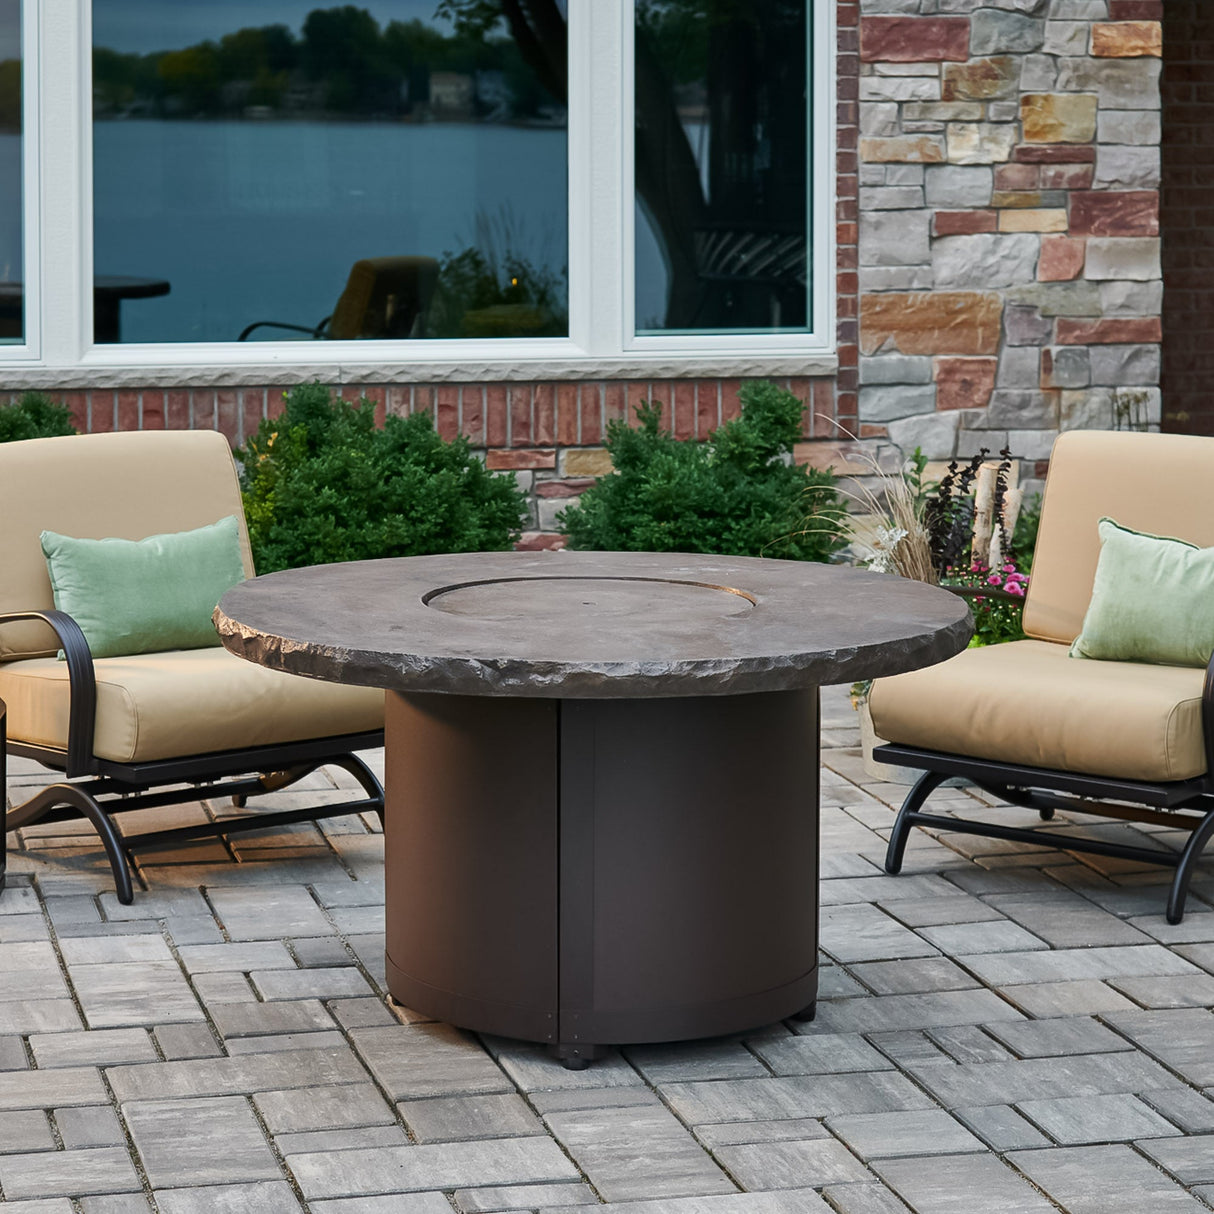 The Marbleized Noche Beacon Round Gas Fire Pit Table on a patio setting with its cover on